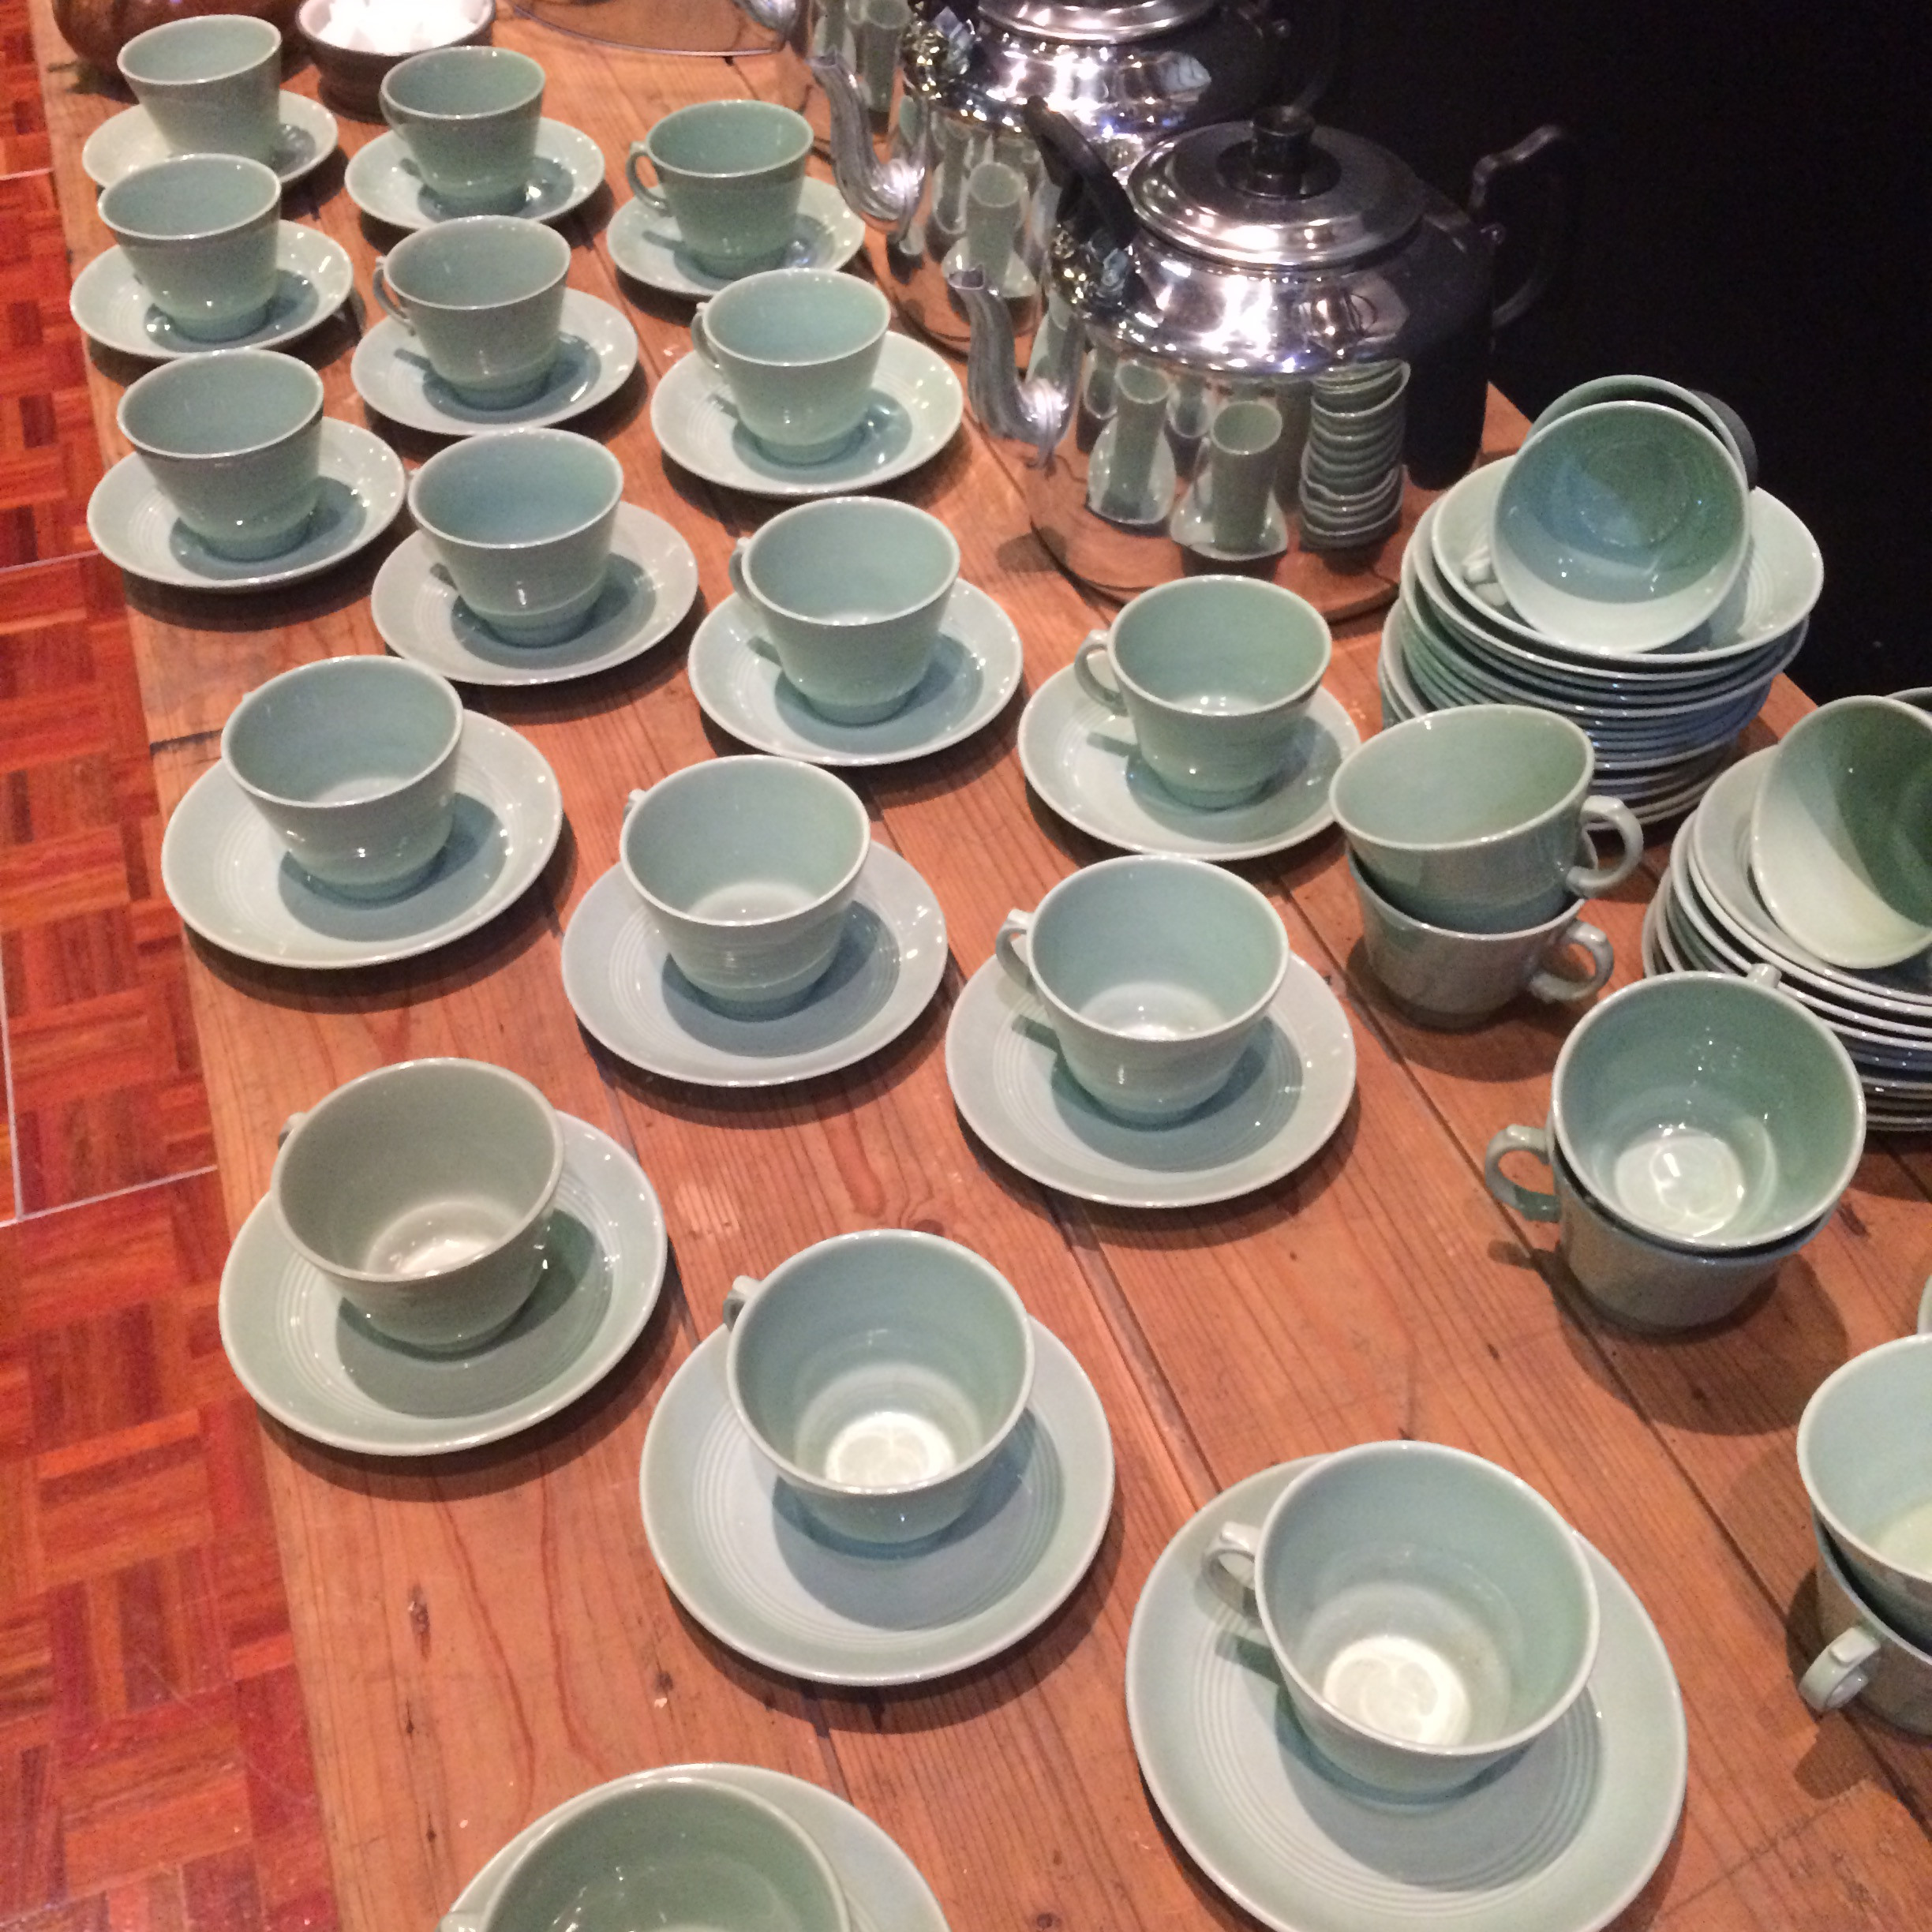 A table covered in teal green cups and saucers